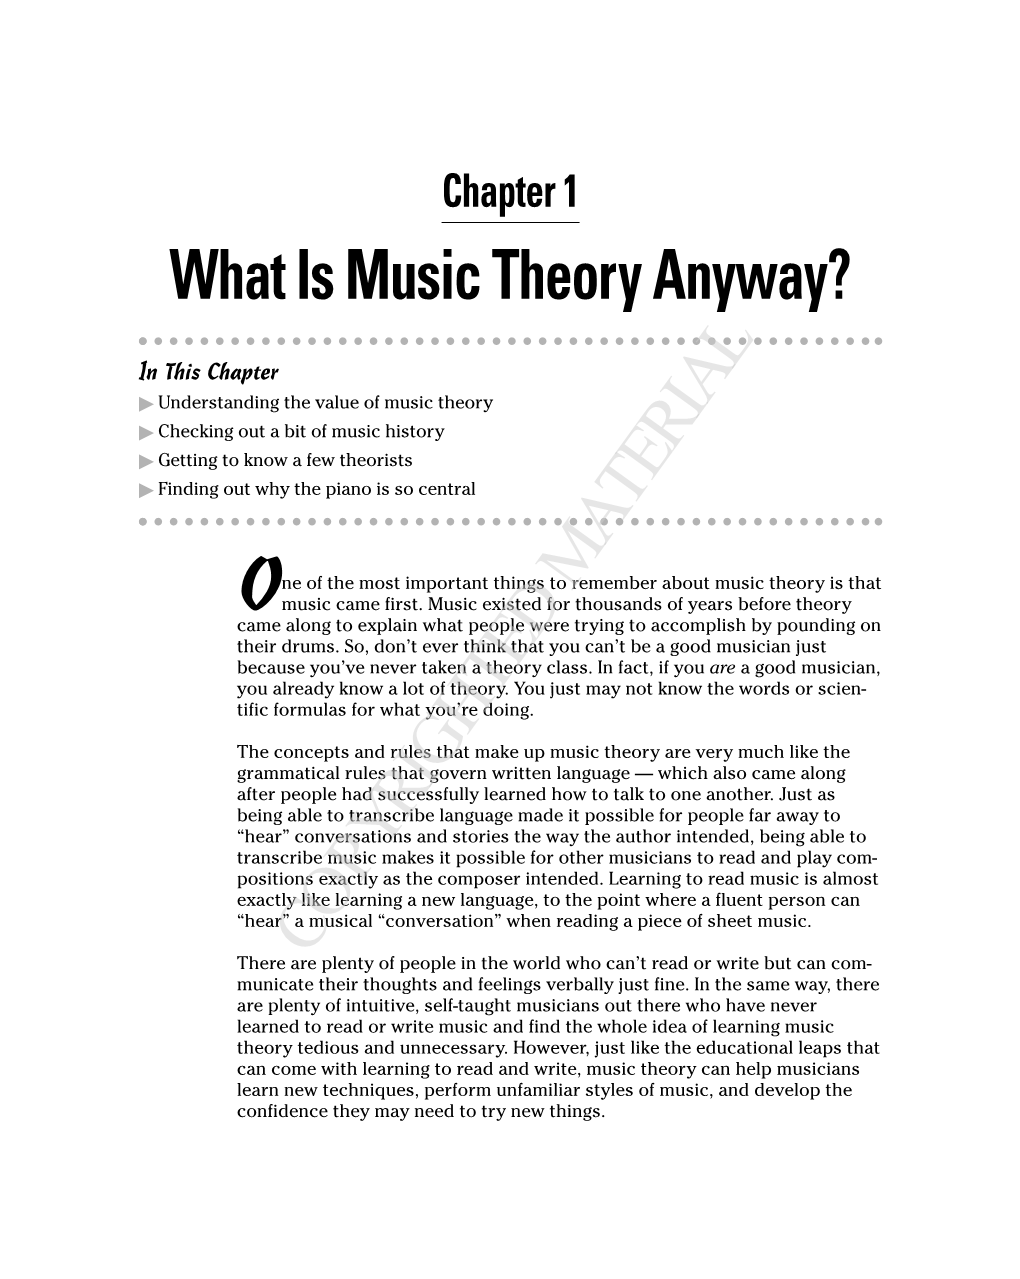 What Is Music Theory Anyway?